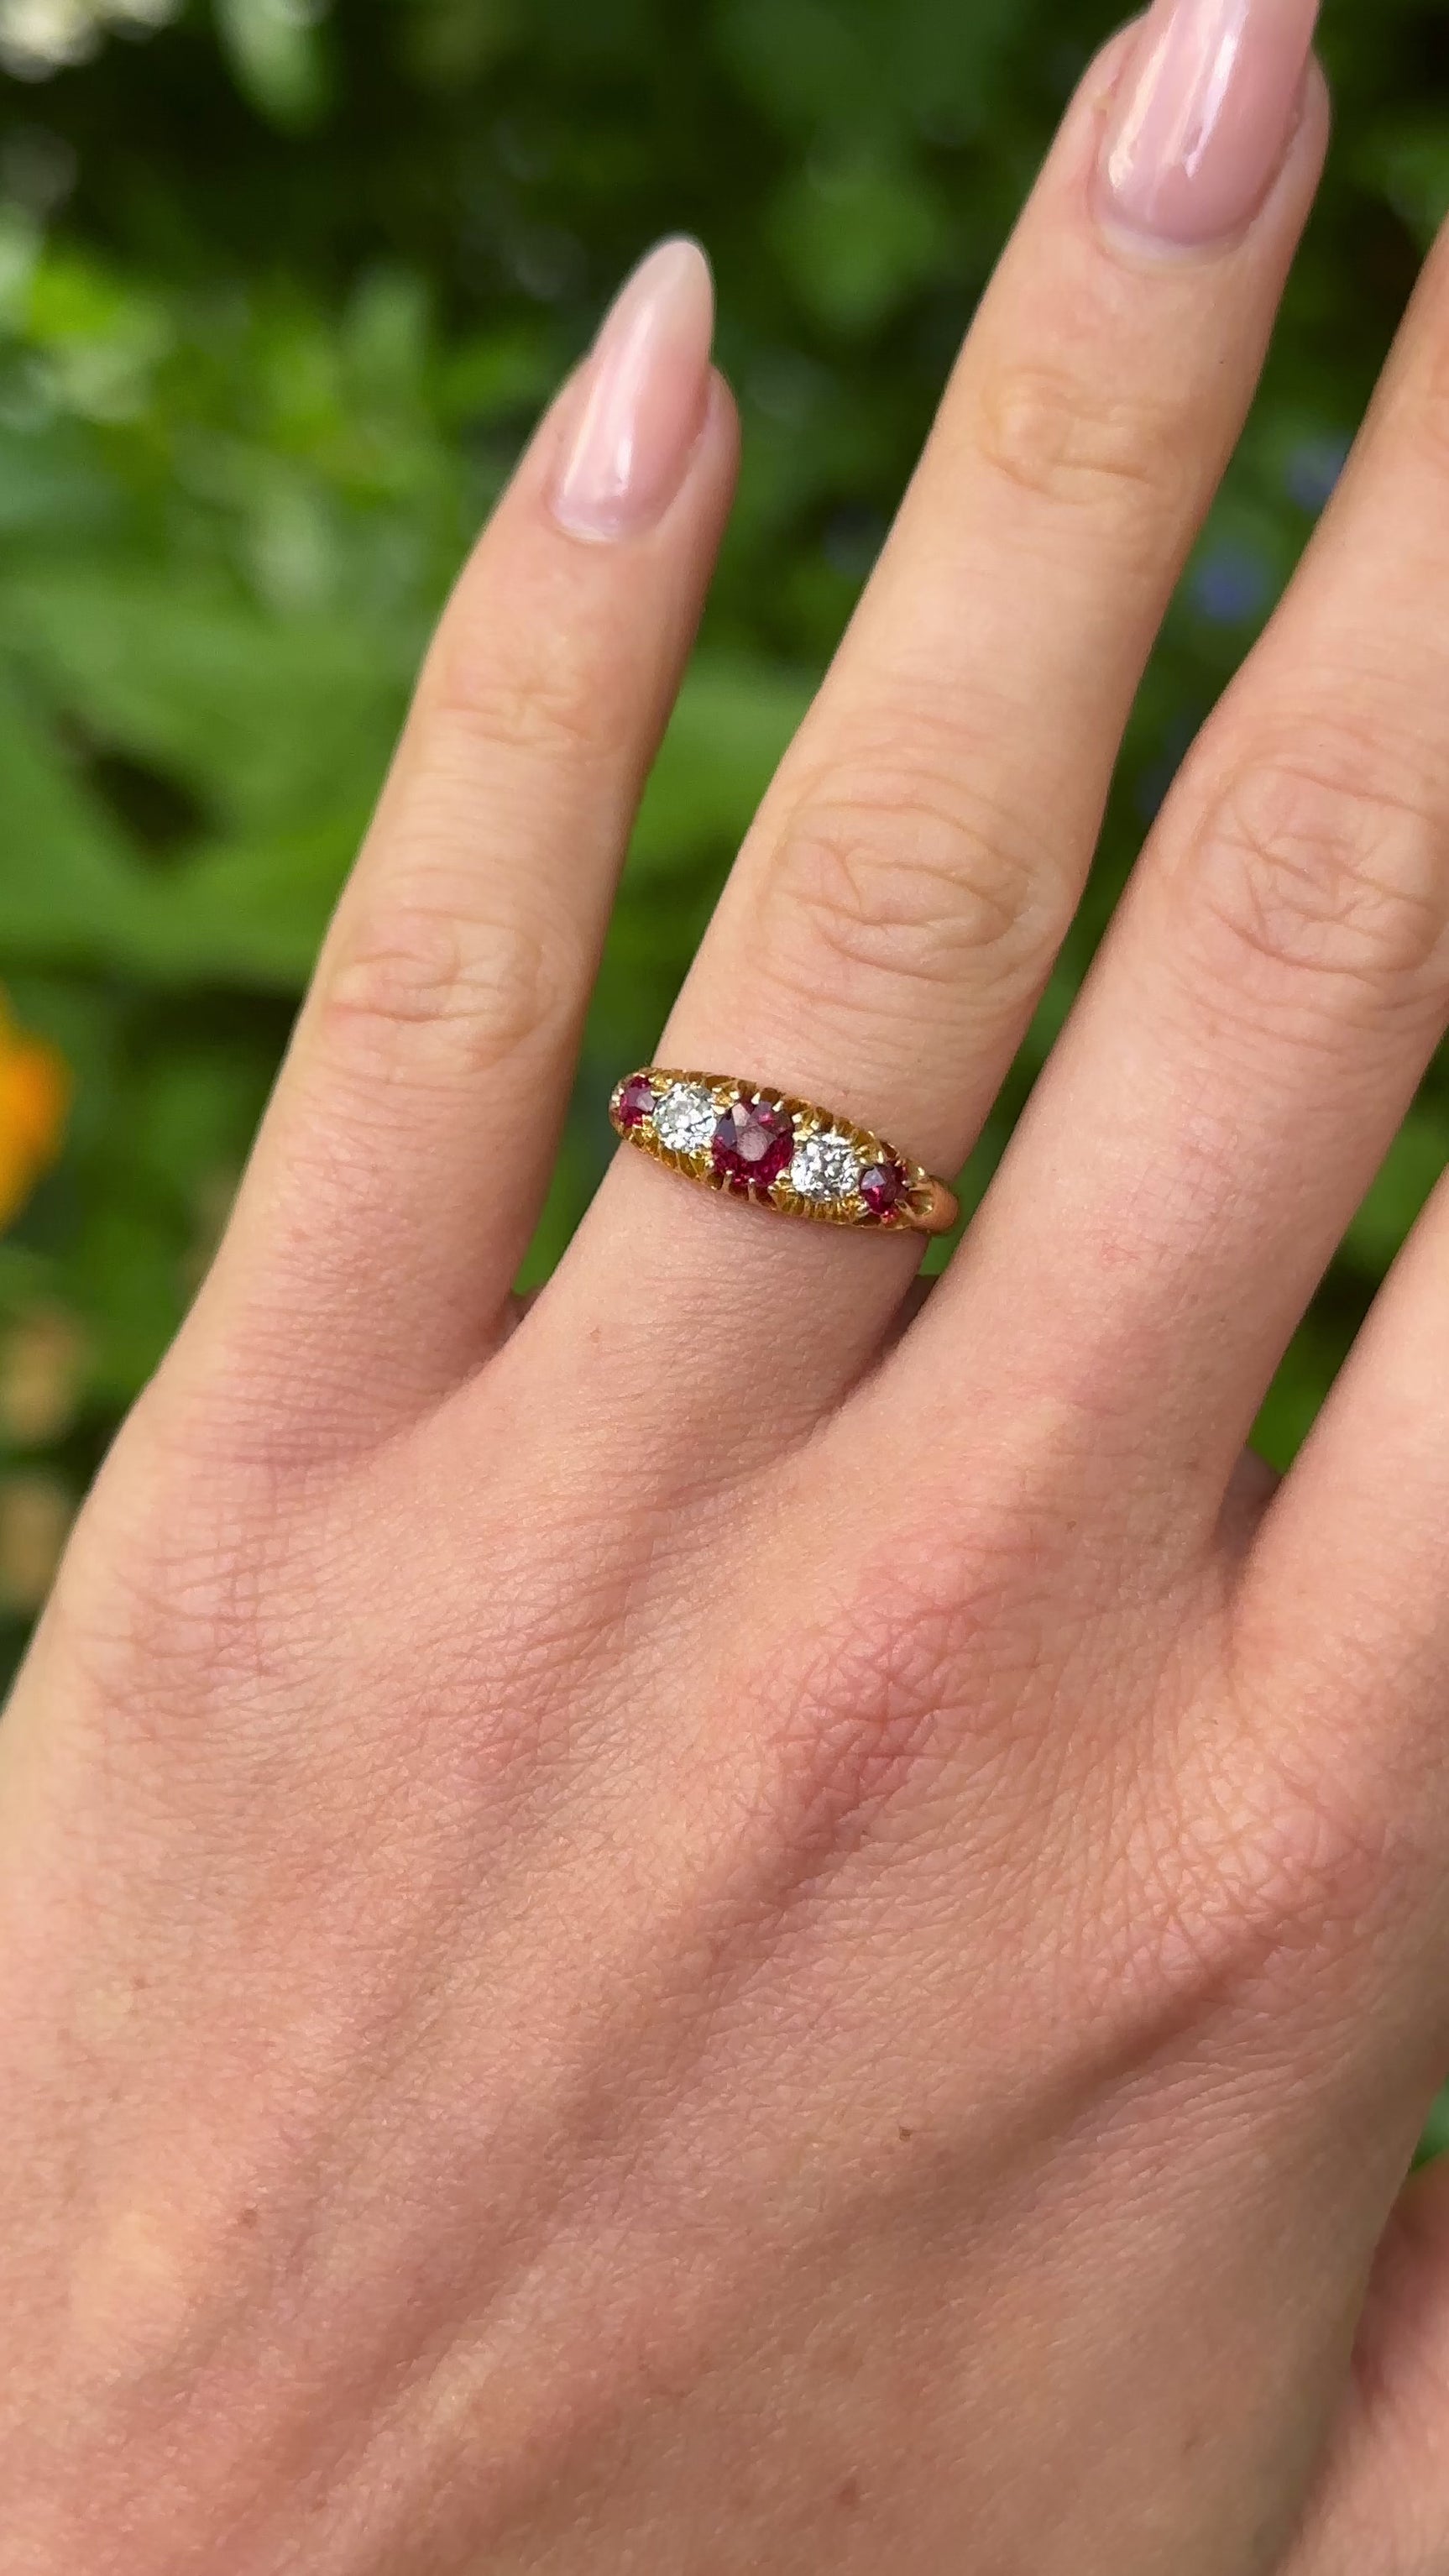 Antique, Victorian Five Stone Ruby and Diamond Ring, 18ct Yellow Gold worn on hand.